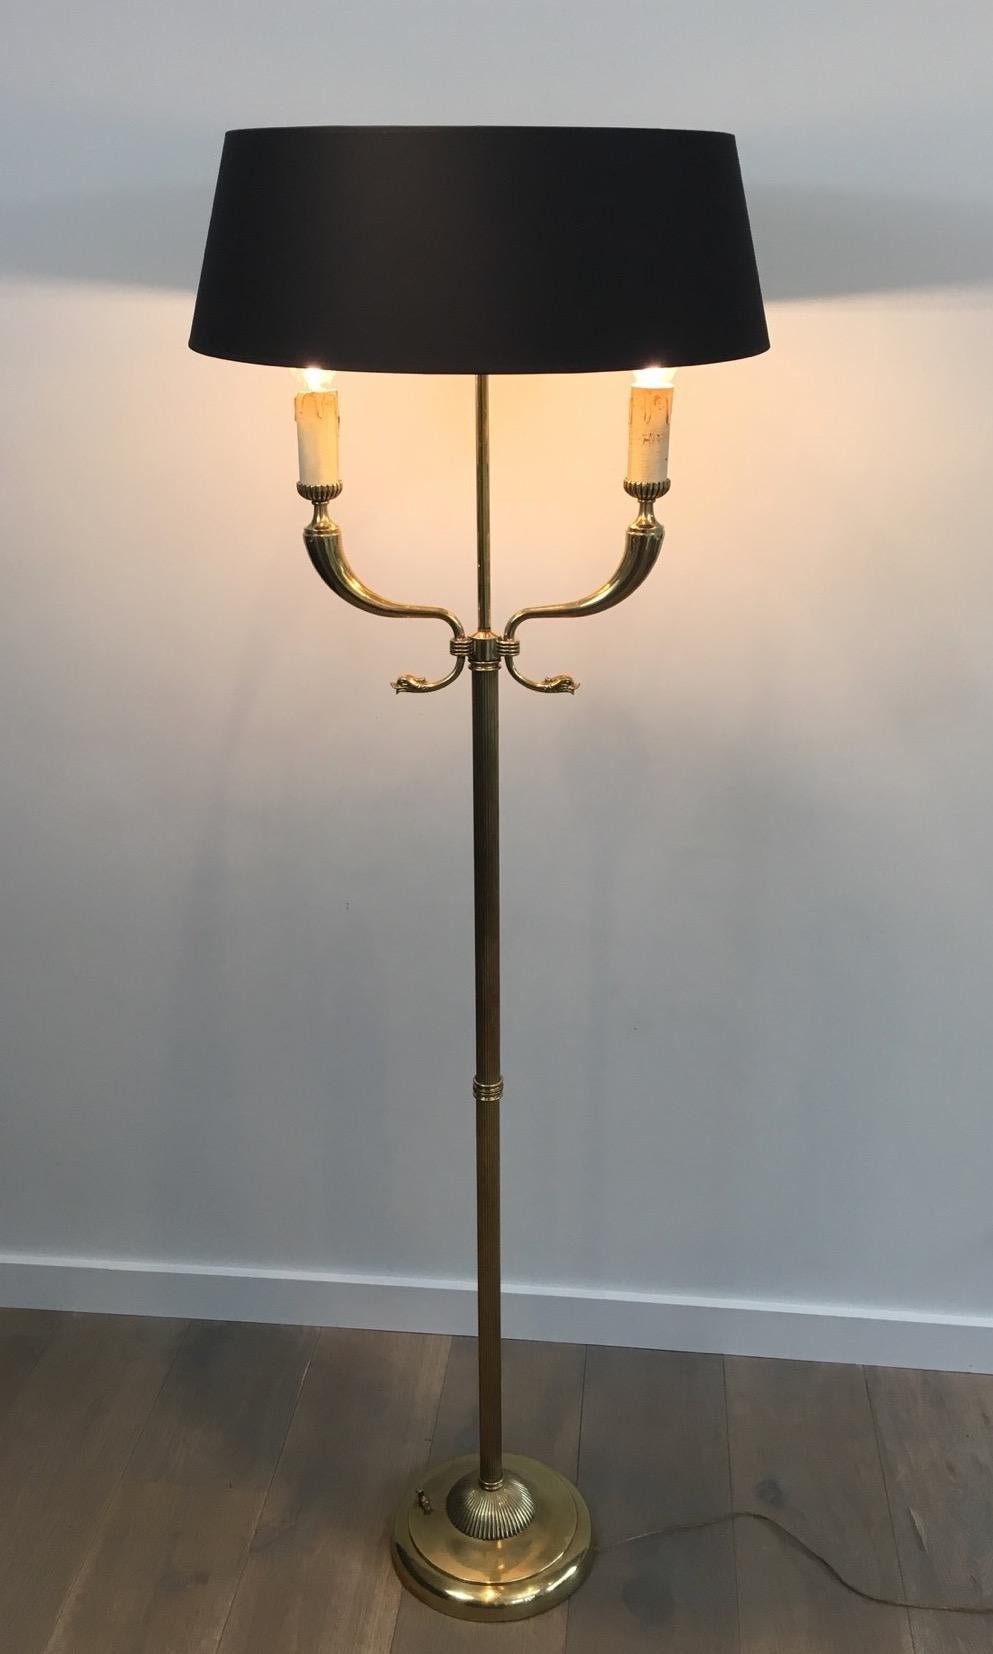 This very elegant neoclassical floor lamp with dolfinheads is made of brass. This is a French work, attributed to the famous Maison Jansen, circa 1960.